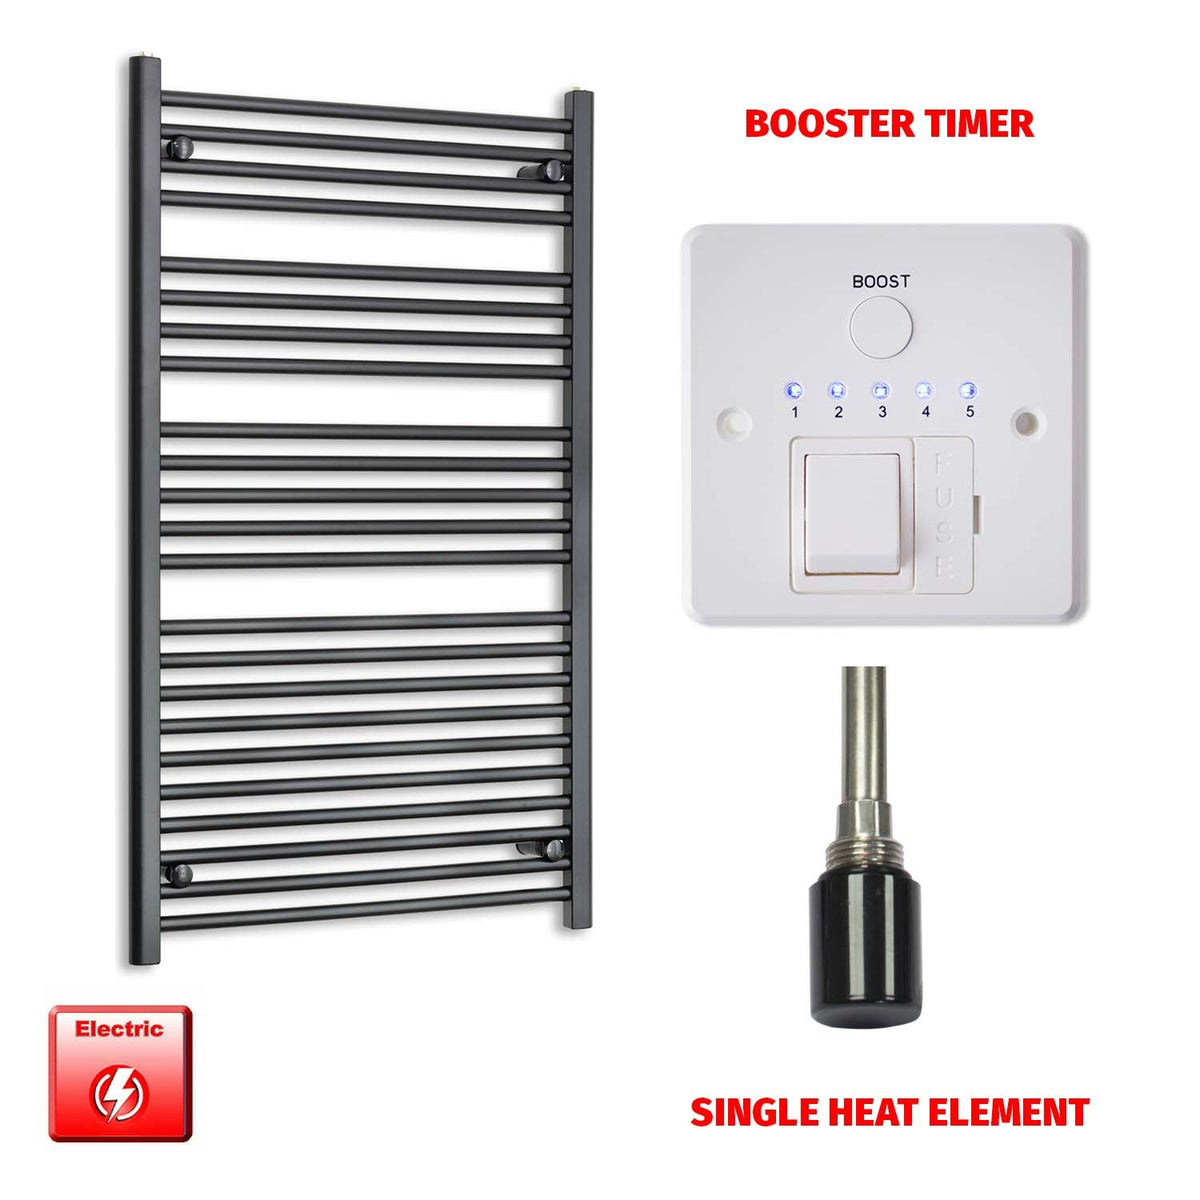 1200mm High 700mm Wide Flat Black Pre-Filled Electric Heated Towel Rail Radiator HTR Single Booster Timer